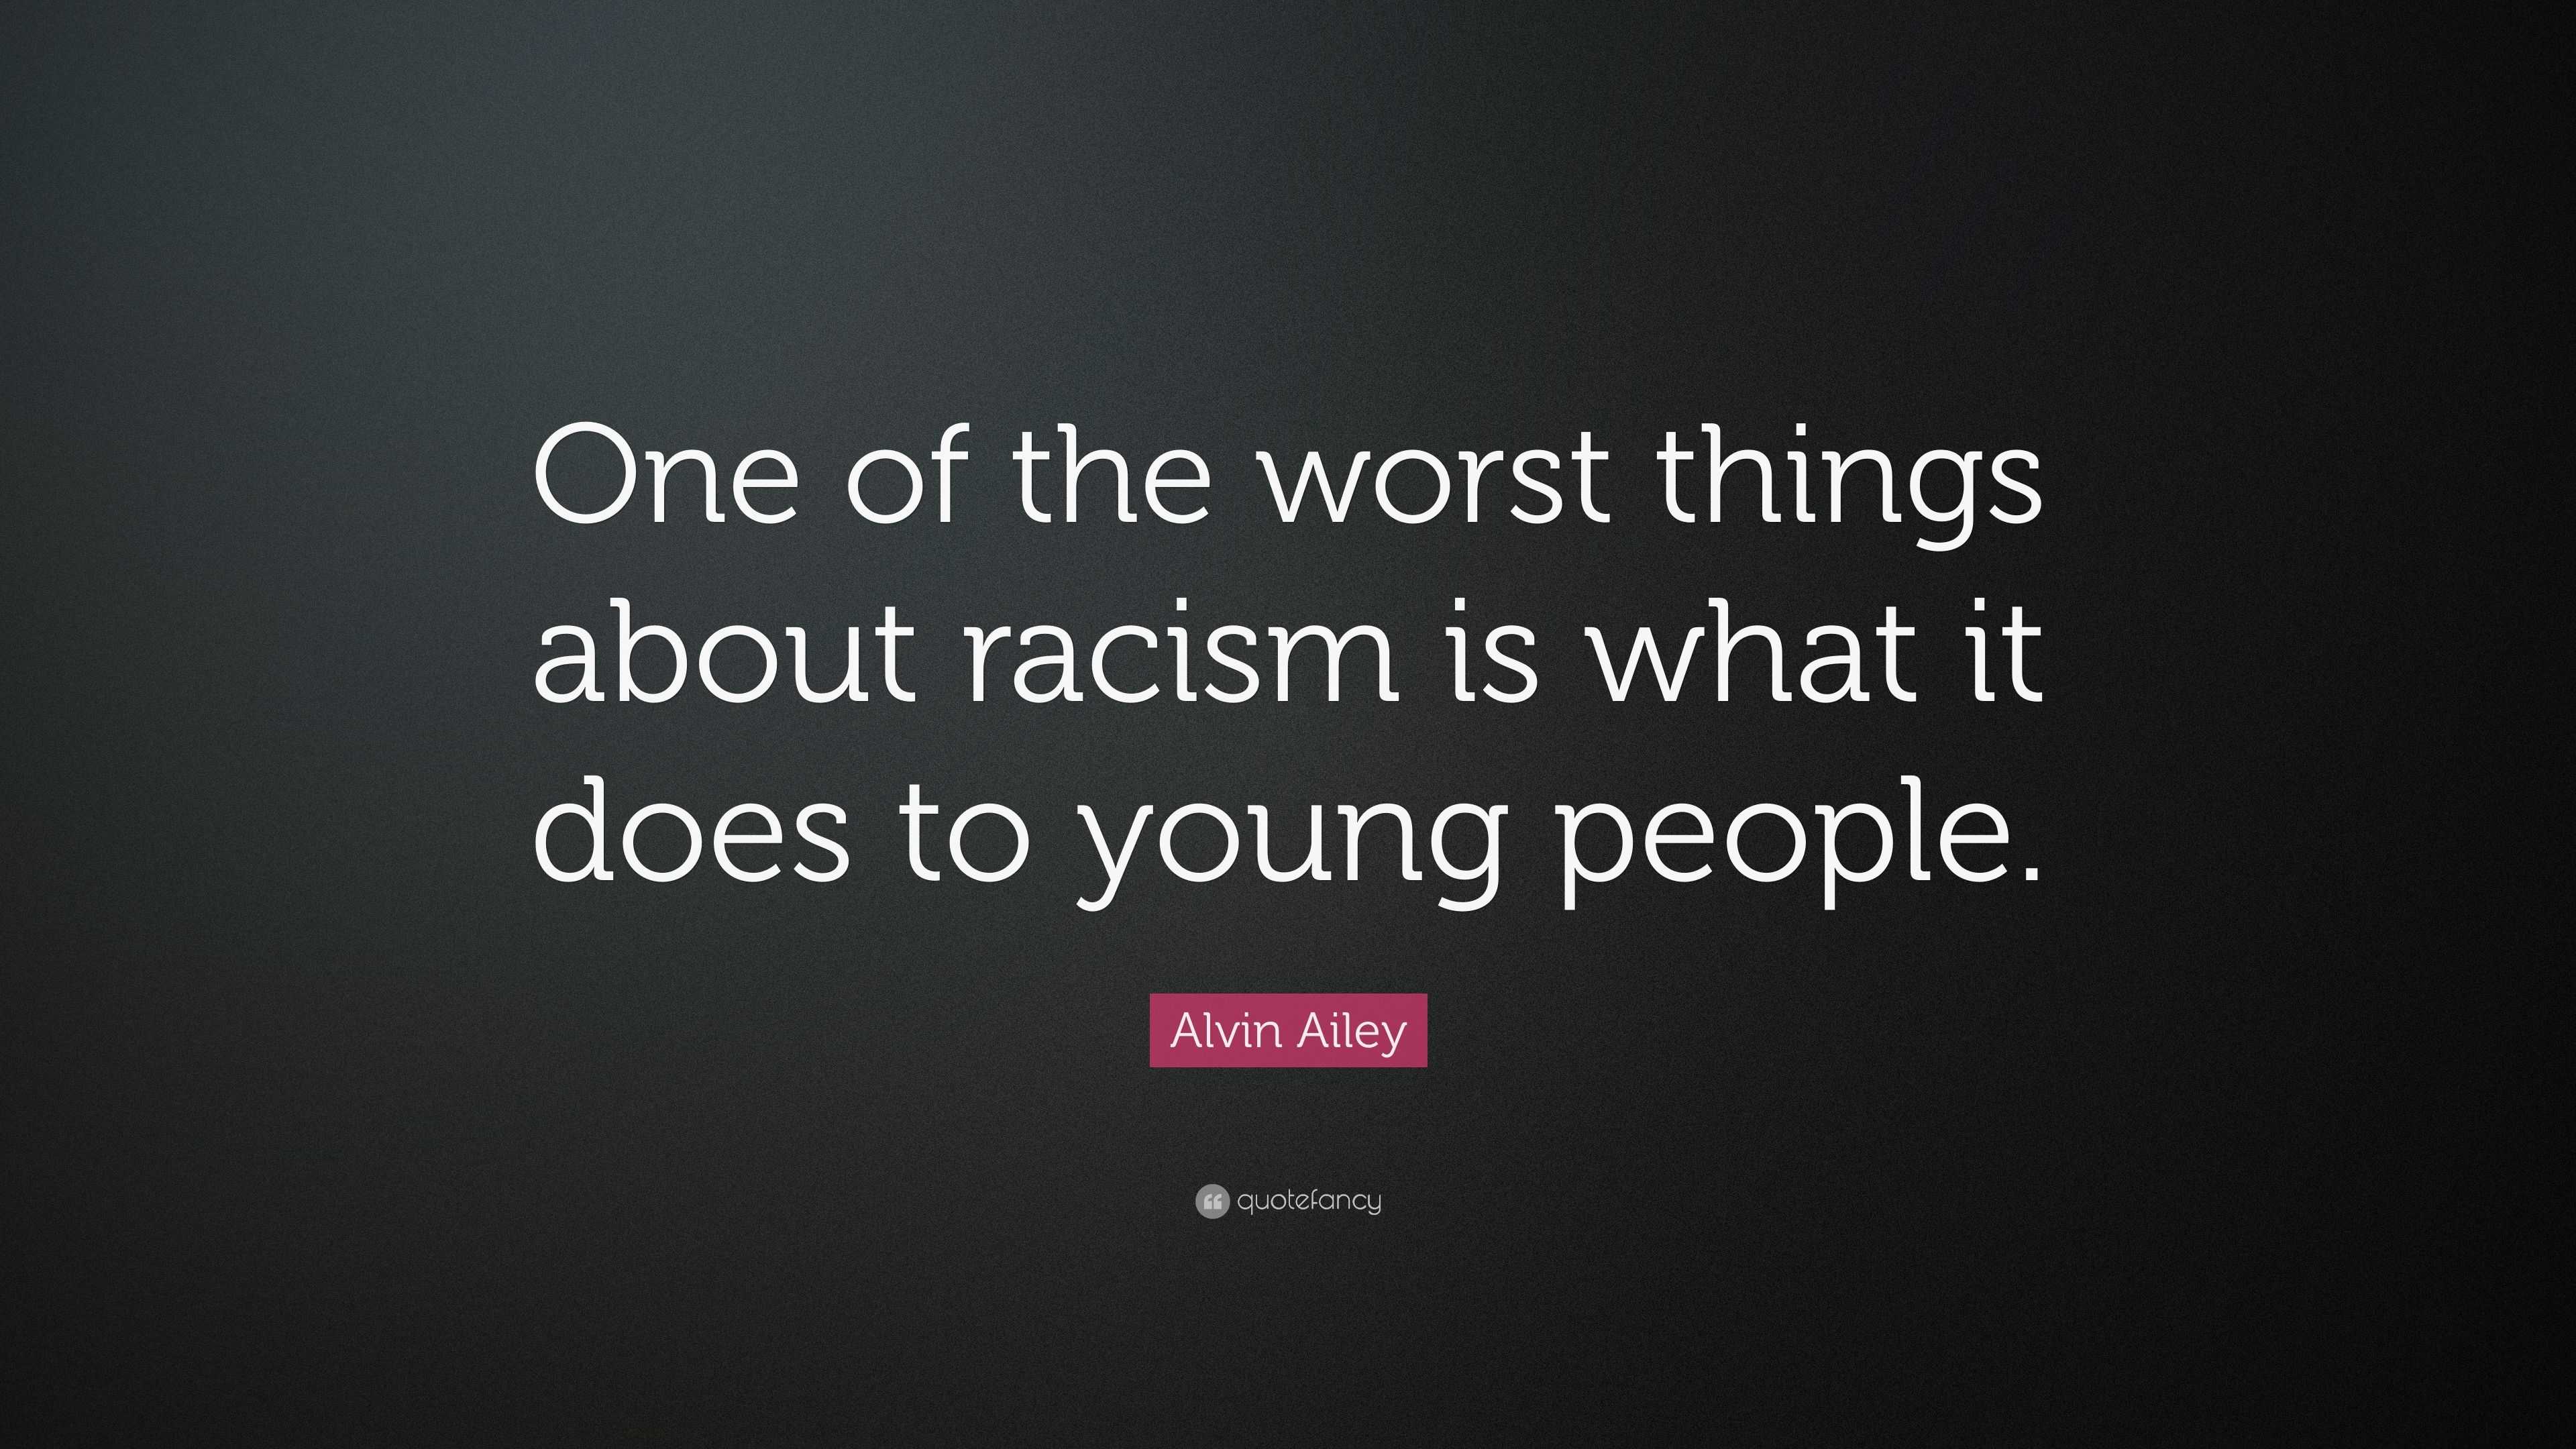 Alvin Ailey Quote: “One of the worst things about racism is what it ...